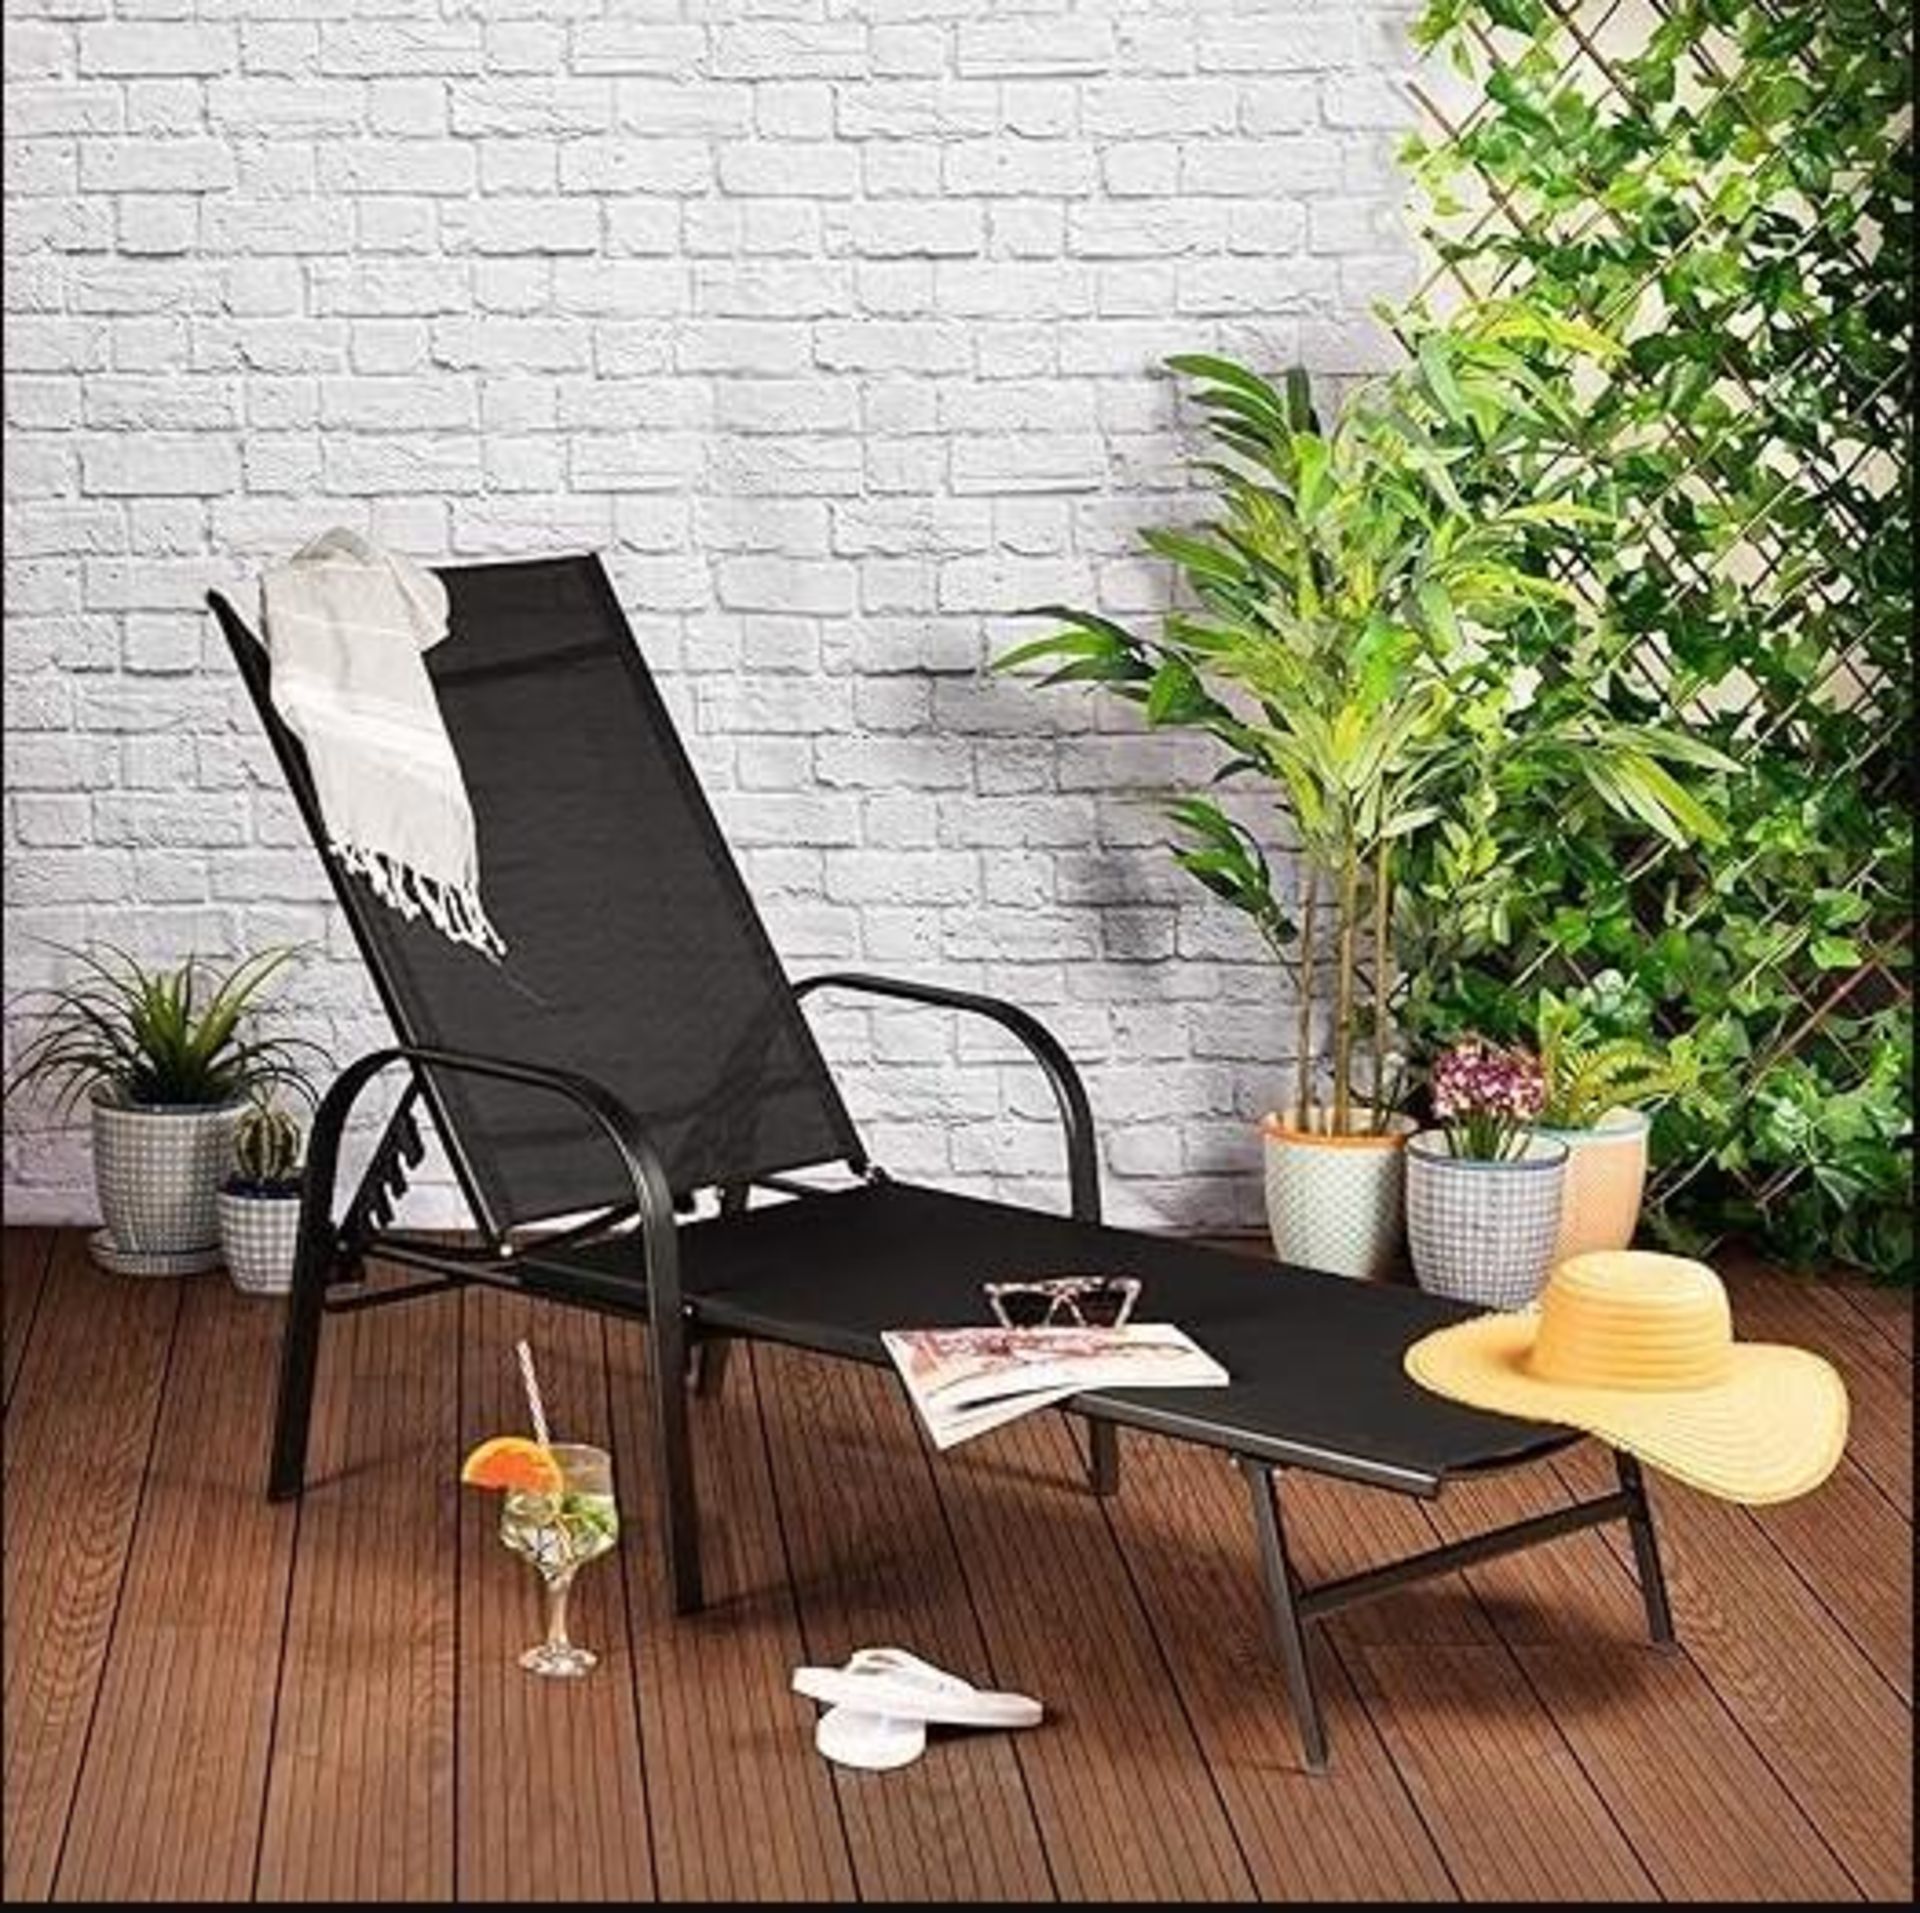 BRAND NEW & BOXED Adjustable Reclining Outdoor Patio Sun Lounger in Black